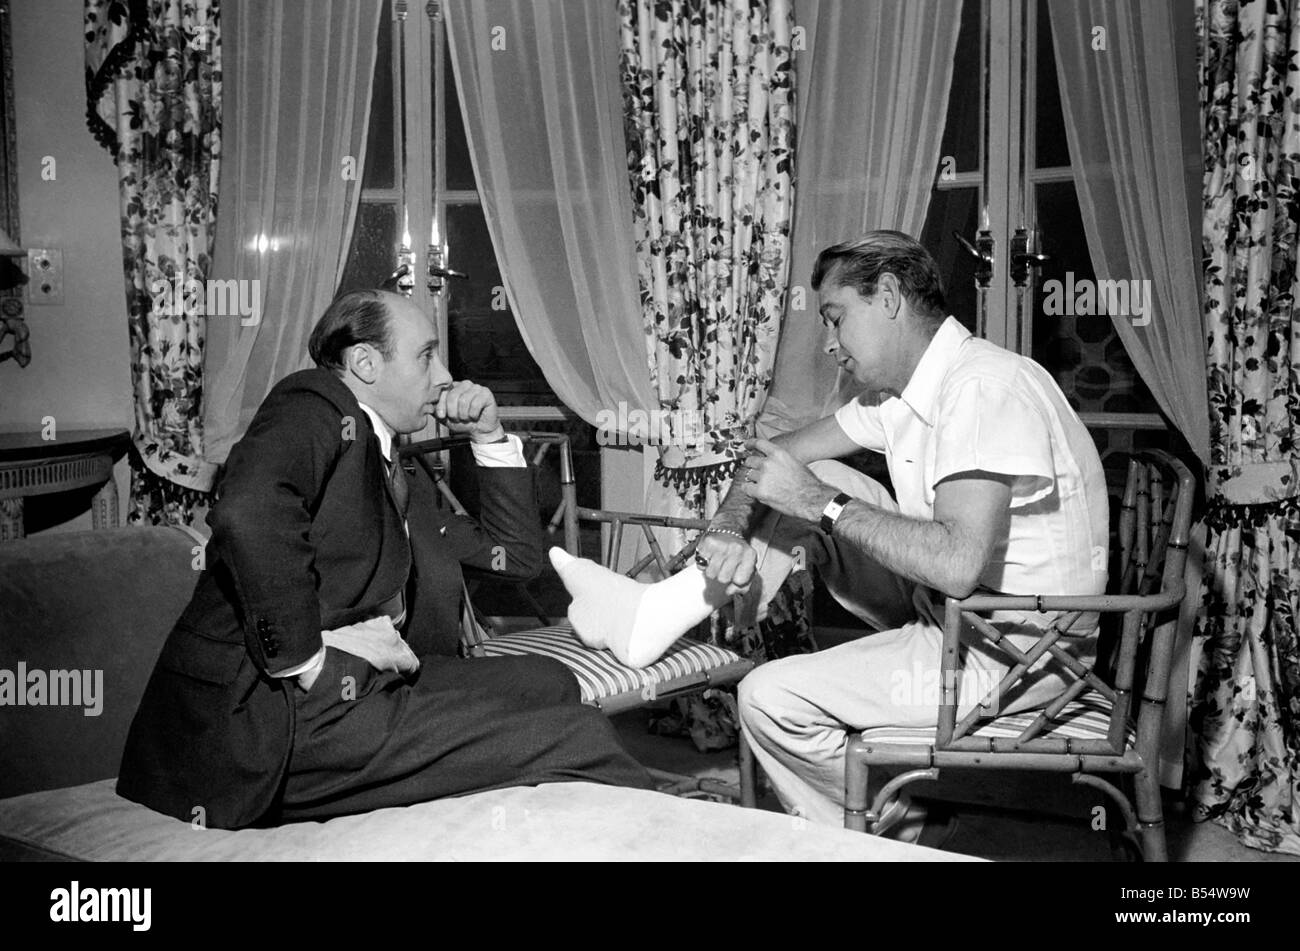 Donald Zec with film star Alan Ladd, who has injured his foot. October 1953 D6473-003 Stock Photo